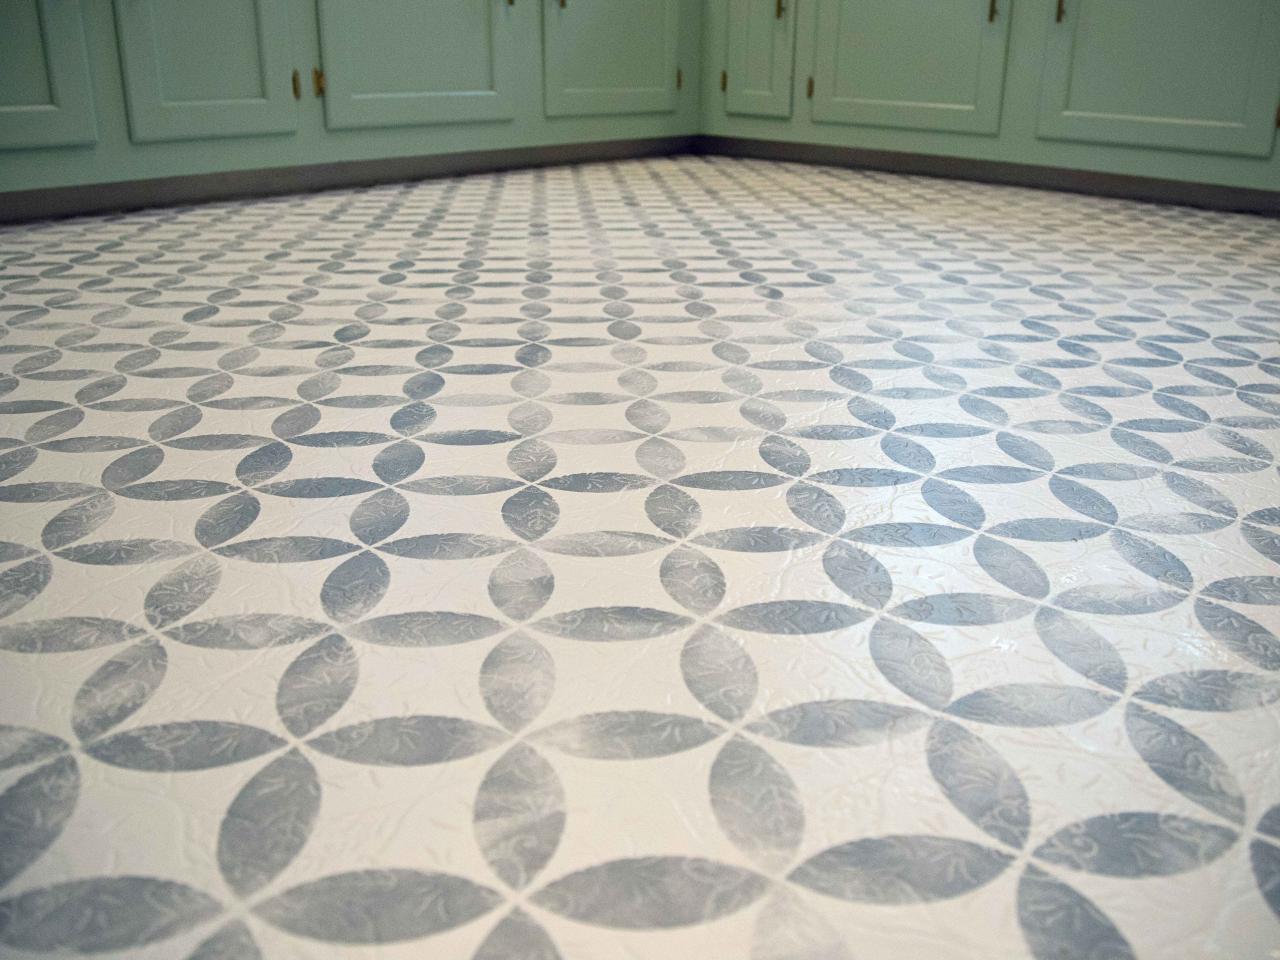 How To Paint Old Vinyl Floors Look, Can You Paint Ceramic Tile Floors To Look Like Slate